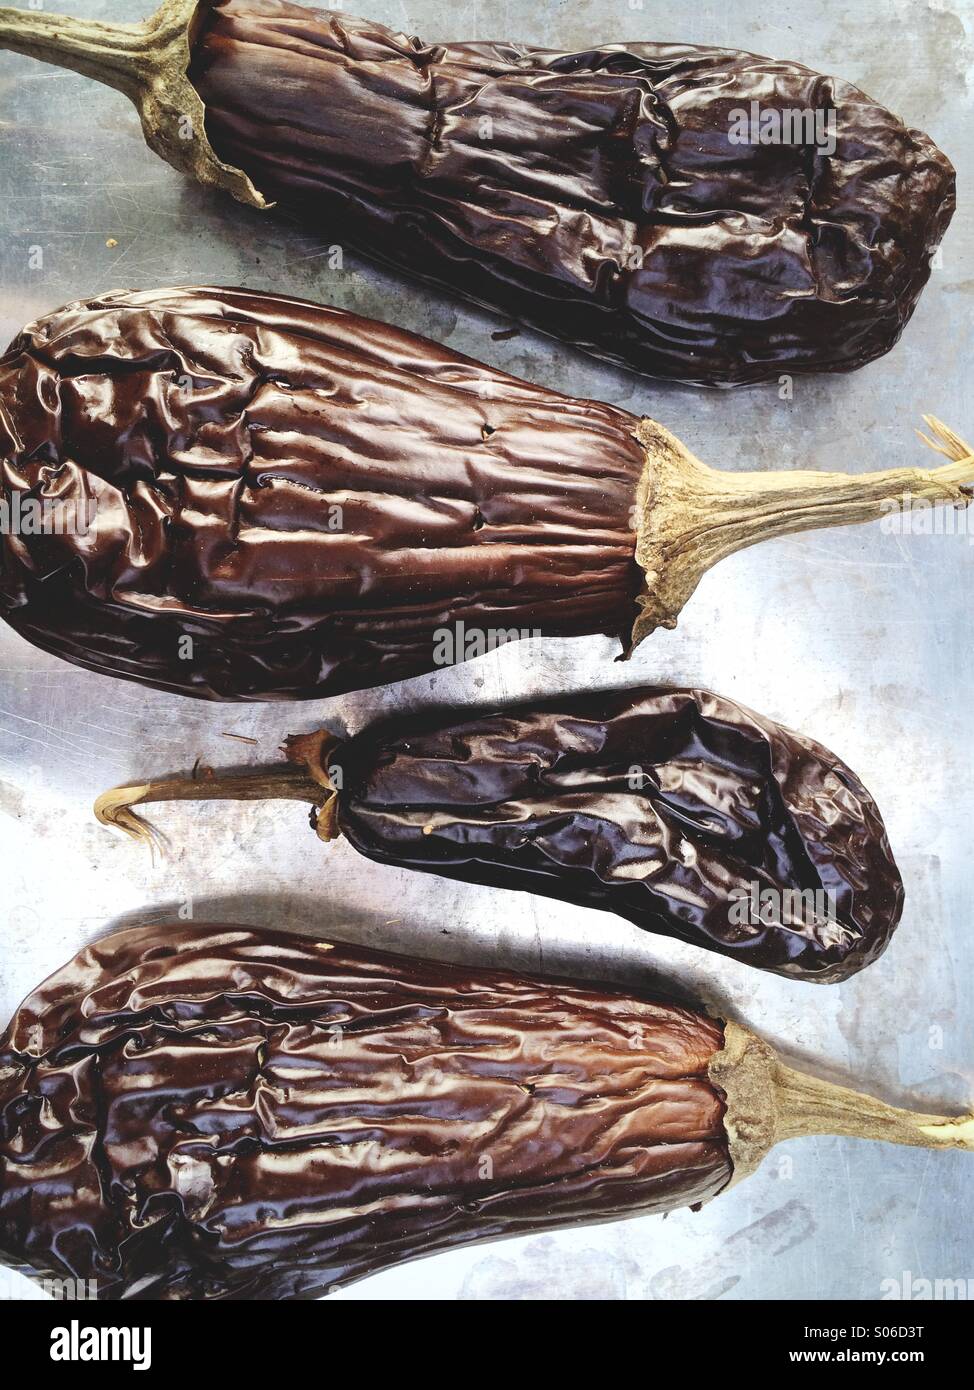 Grilled eggplant (also known as aubergine) on a baking tray after being cooked whole. Stock Photo